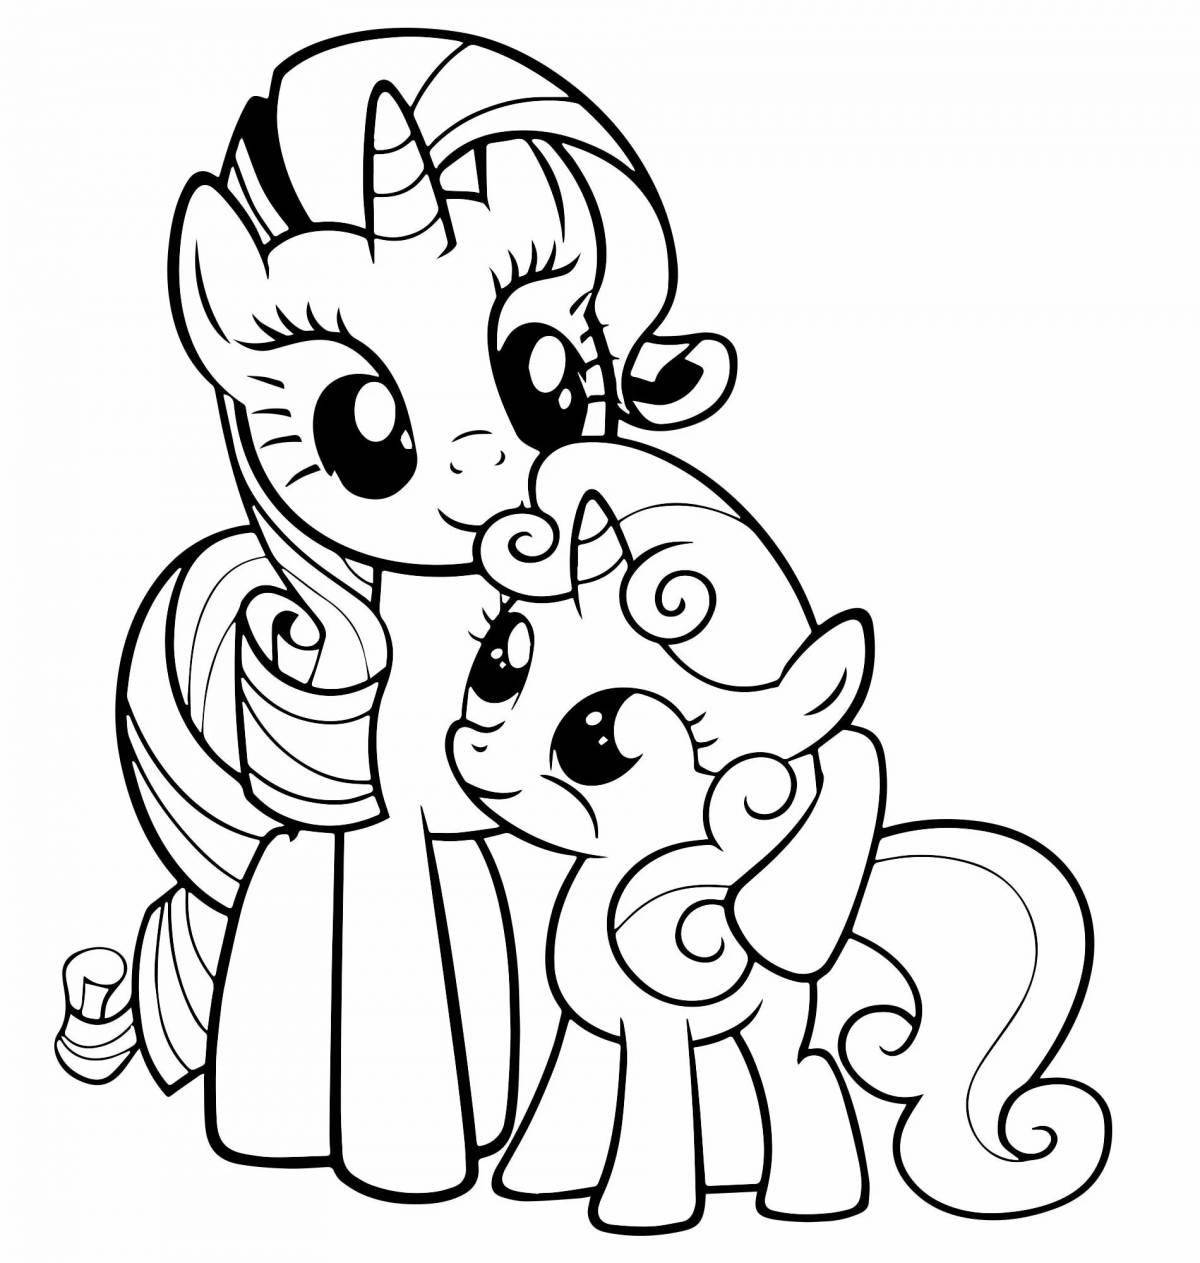 Coloring page elegant pony with print